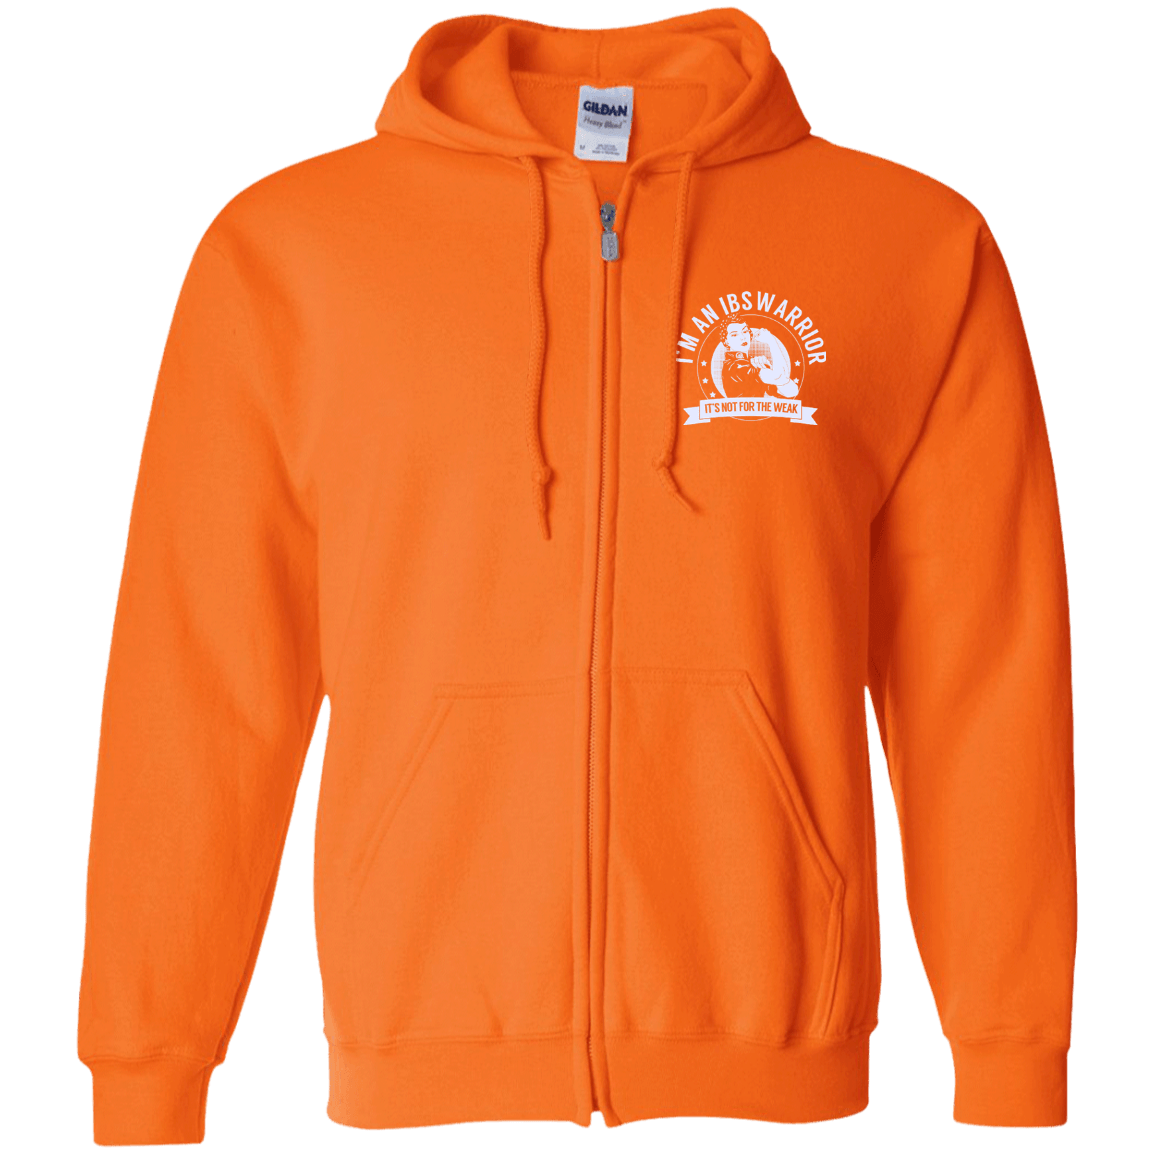 Irritable Bowel Syndrome - IBS Warrior NFTW Zip Up Hooded Sweatshirt - The Unchargeables